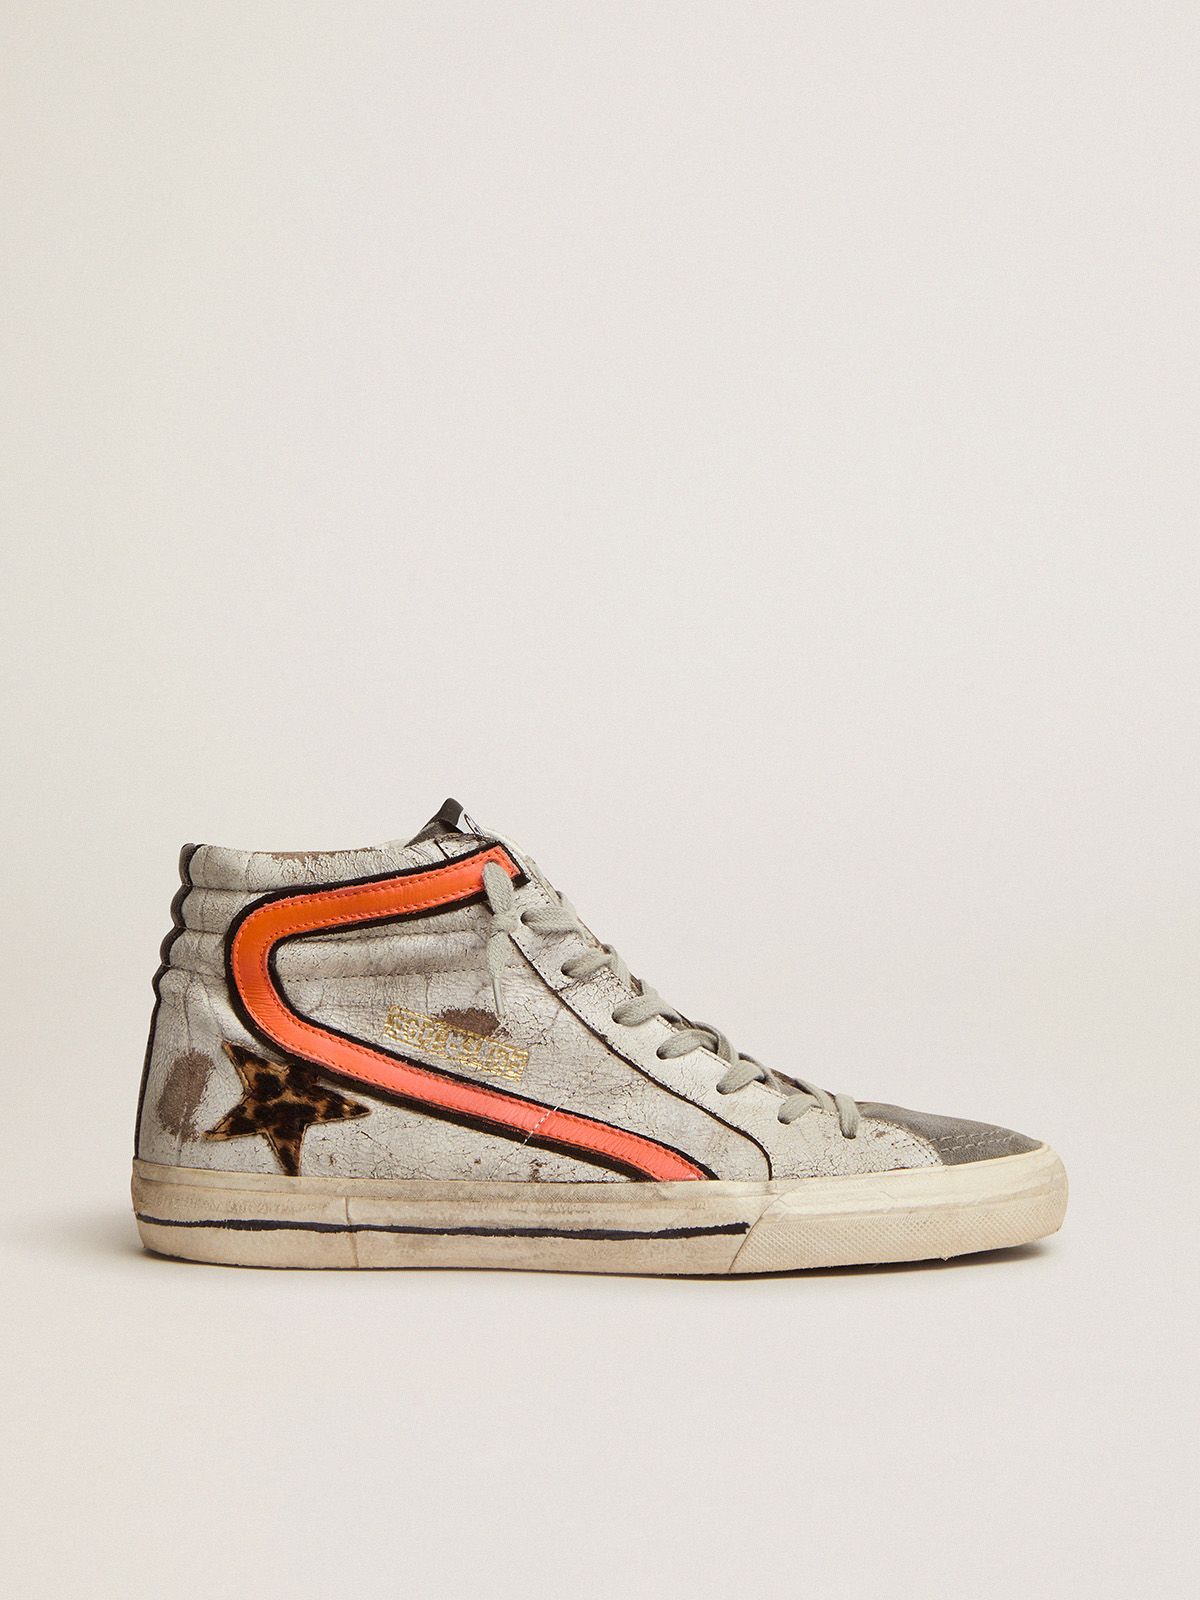 golden goose sneakers in star Slide pony skin suede leopard-print with crackled